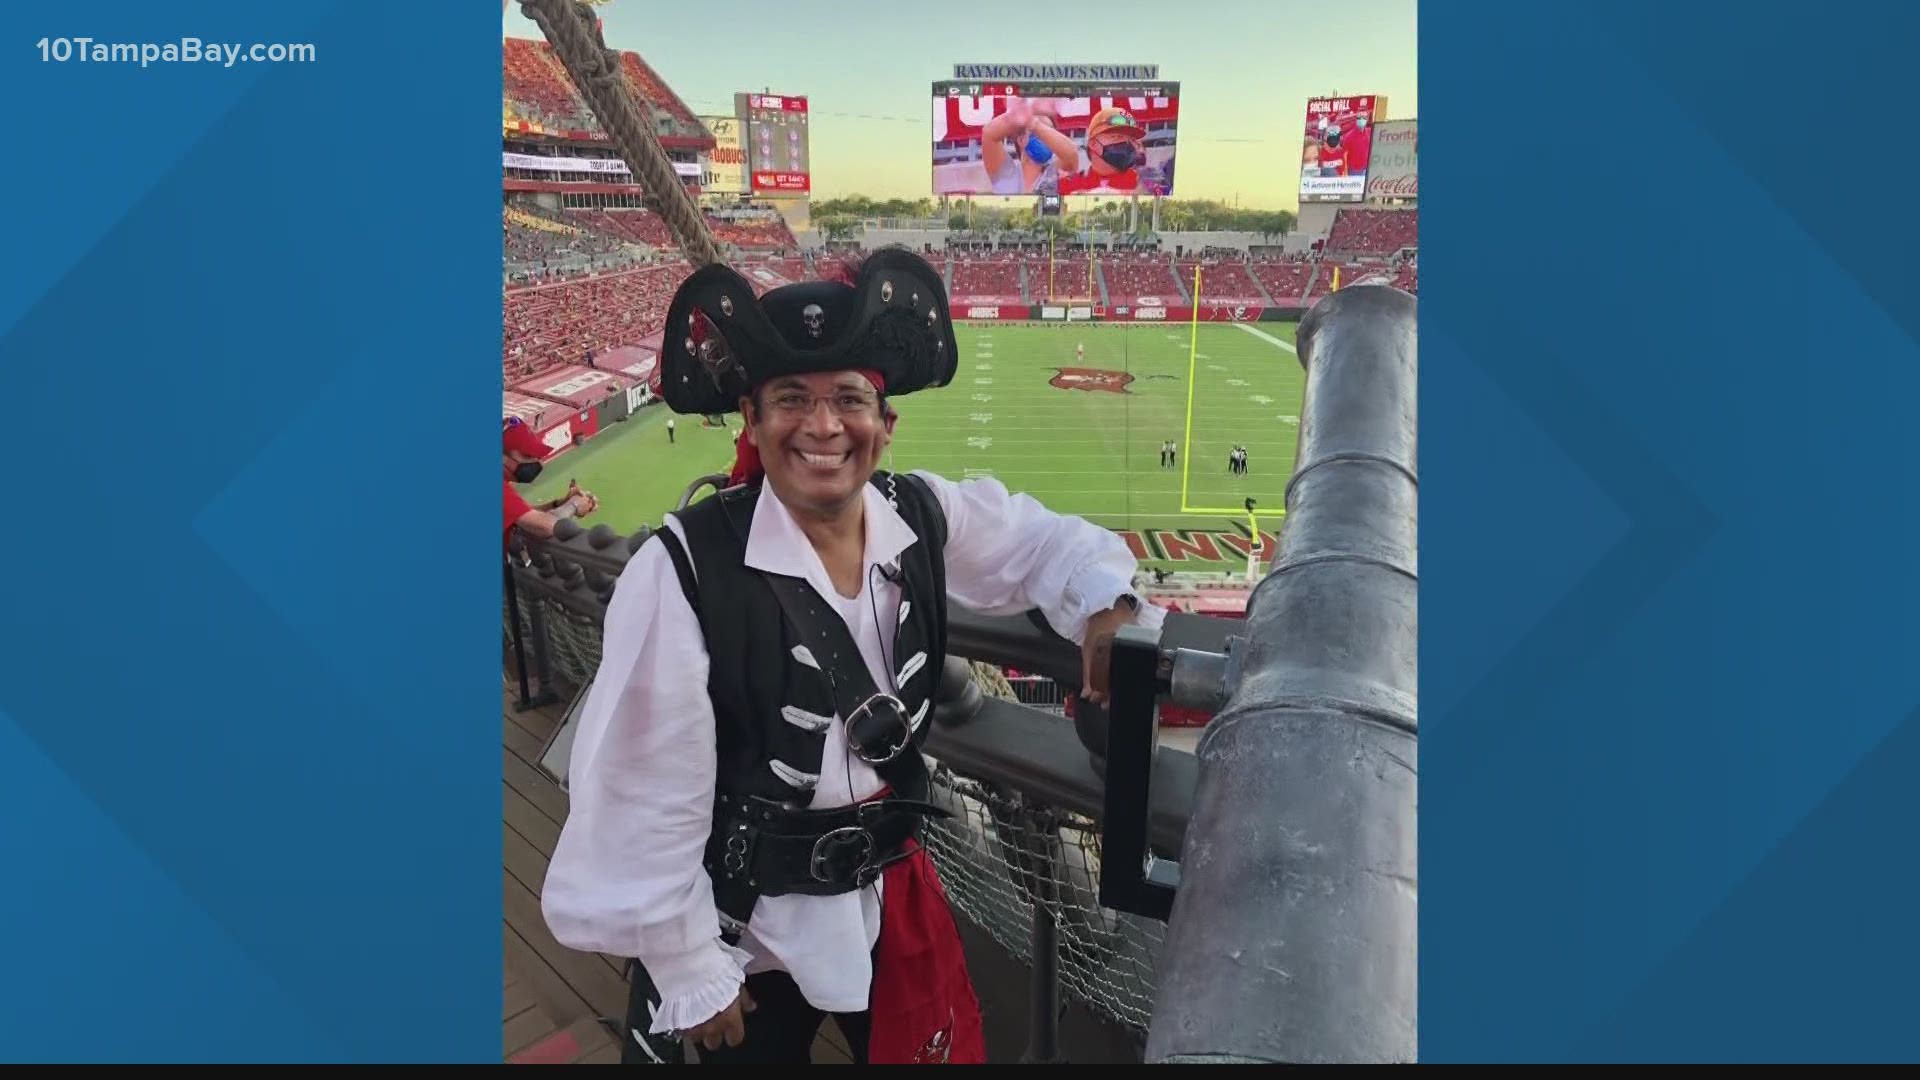 He hopes to attend Super Bowl LV if the Bucs make it all the way.